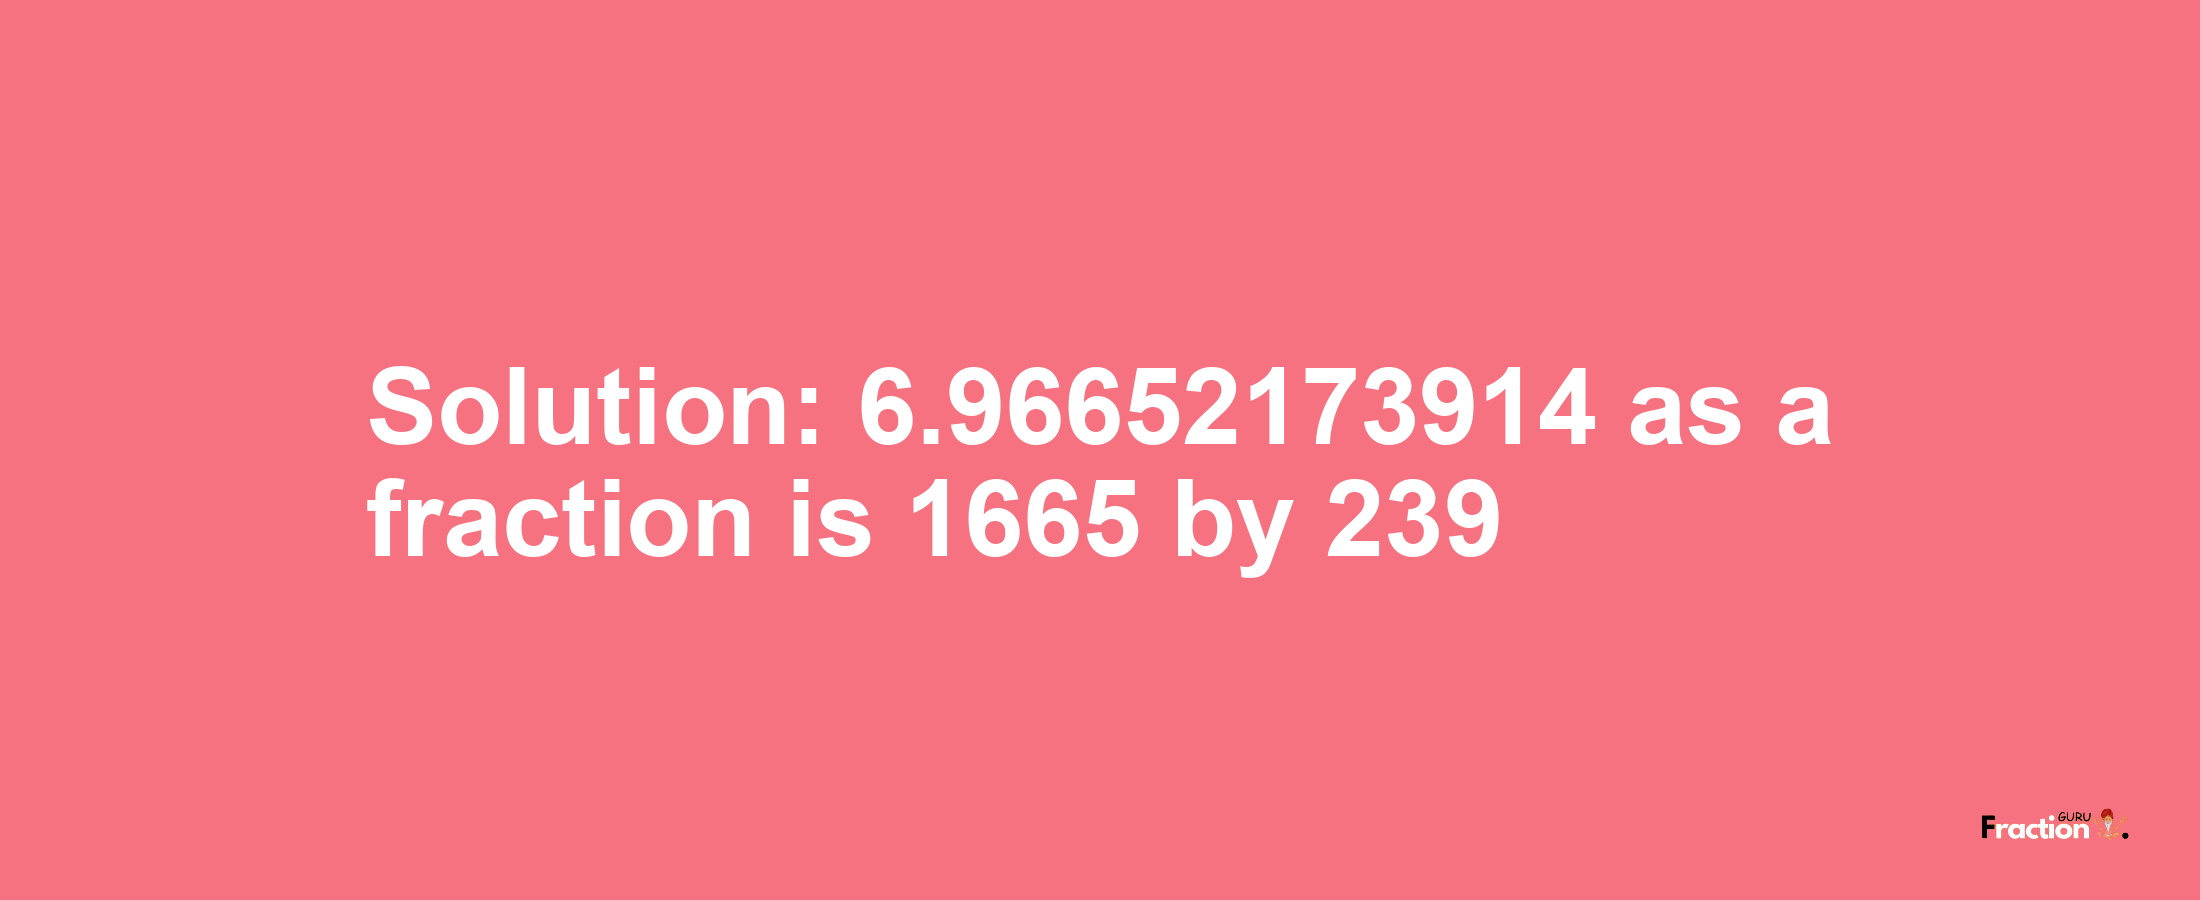 Solution:6.96652173914 as a fraction is 1665/239